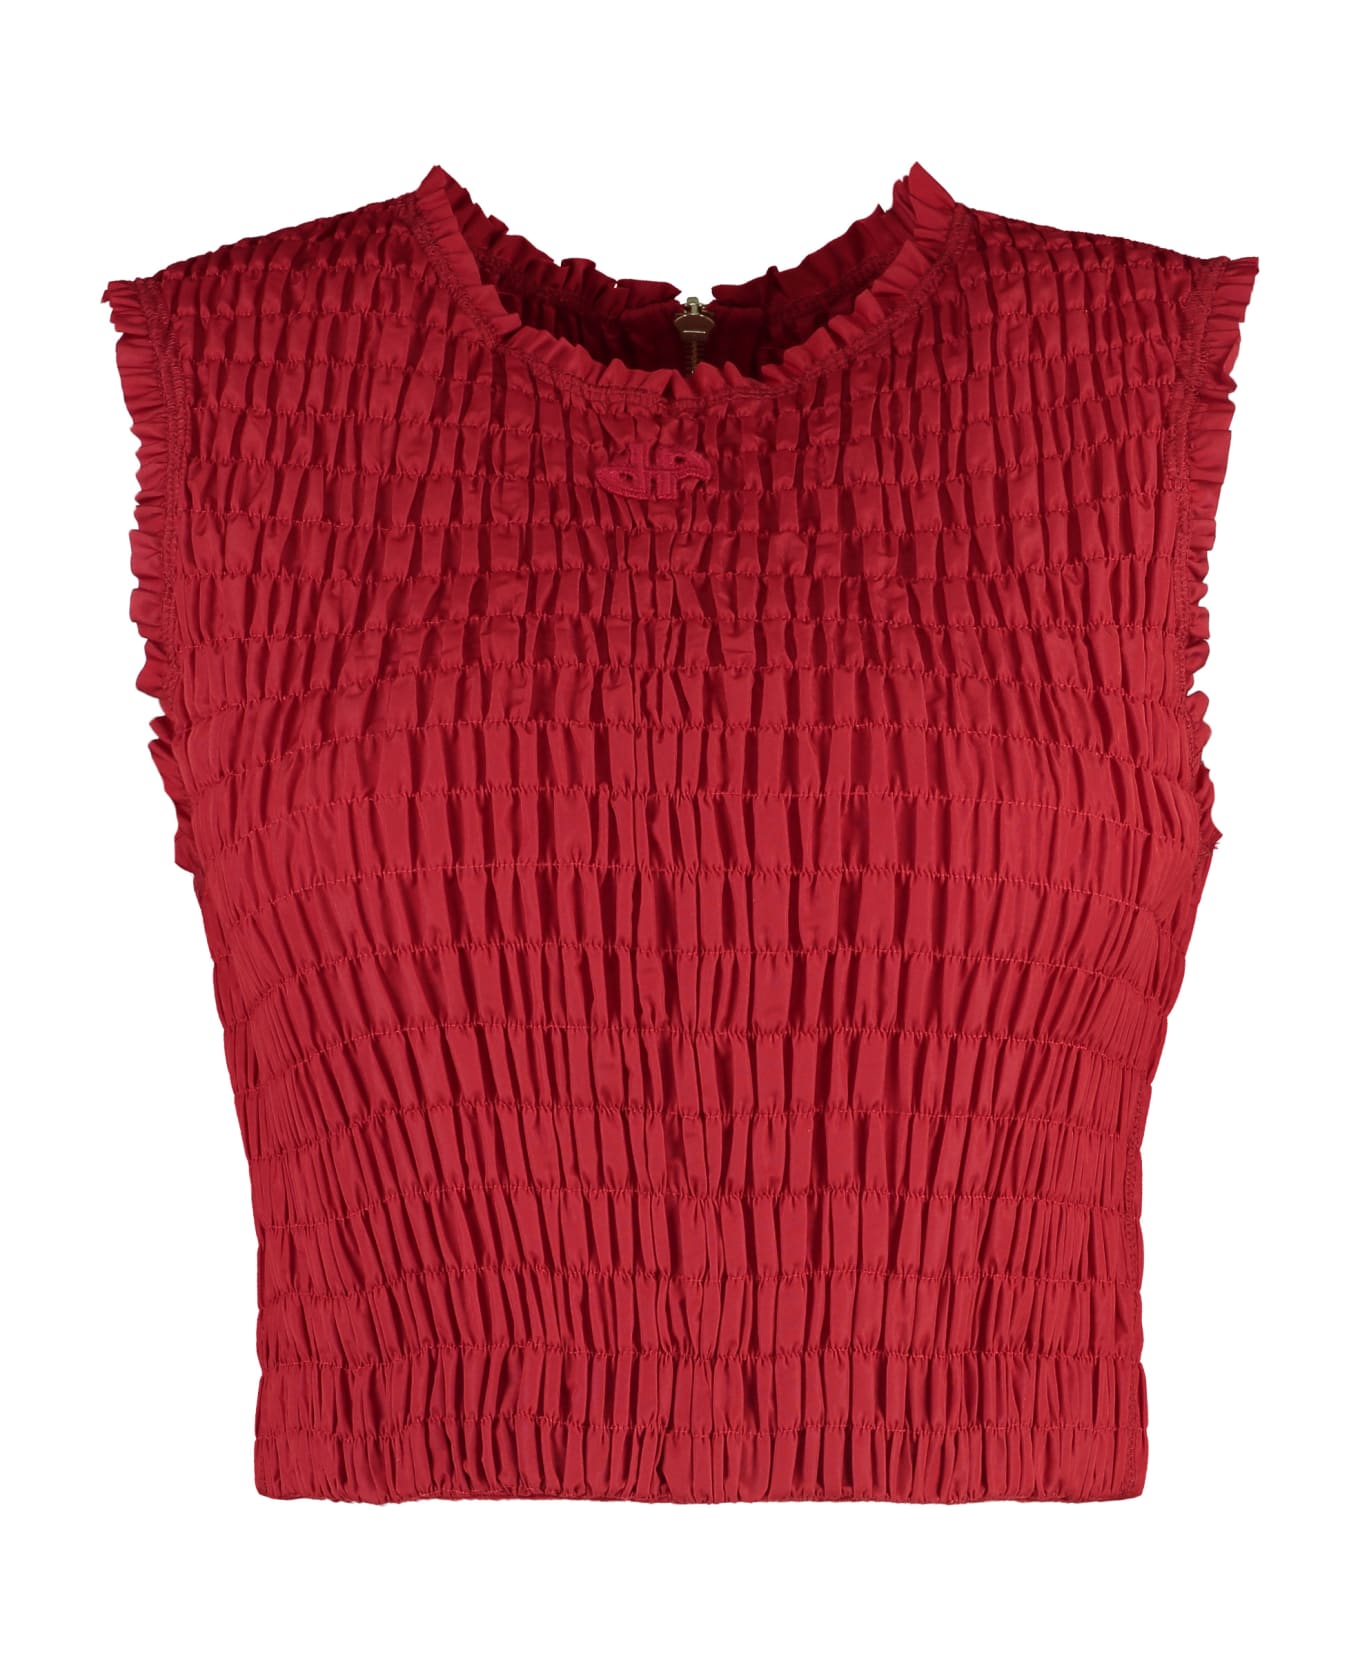 Patou Technical Fabric Crop Top - red ベスト